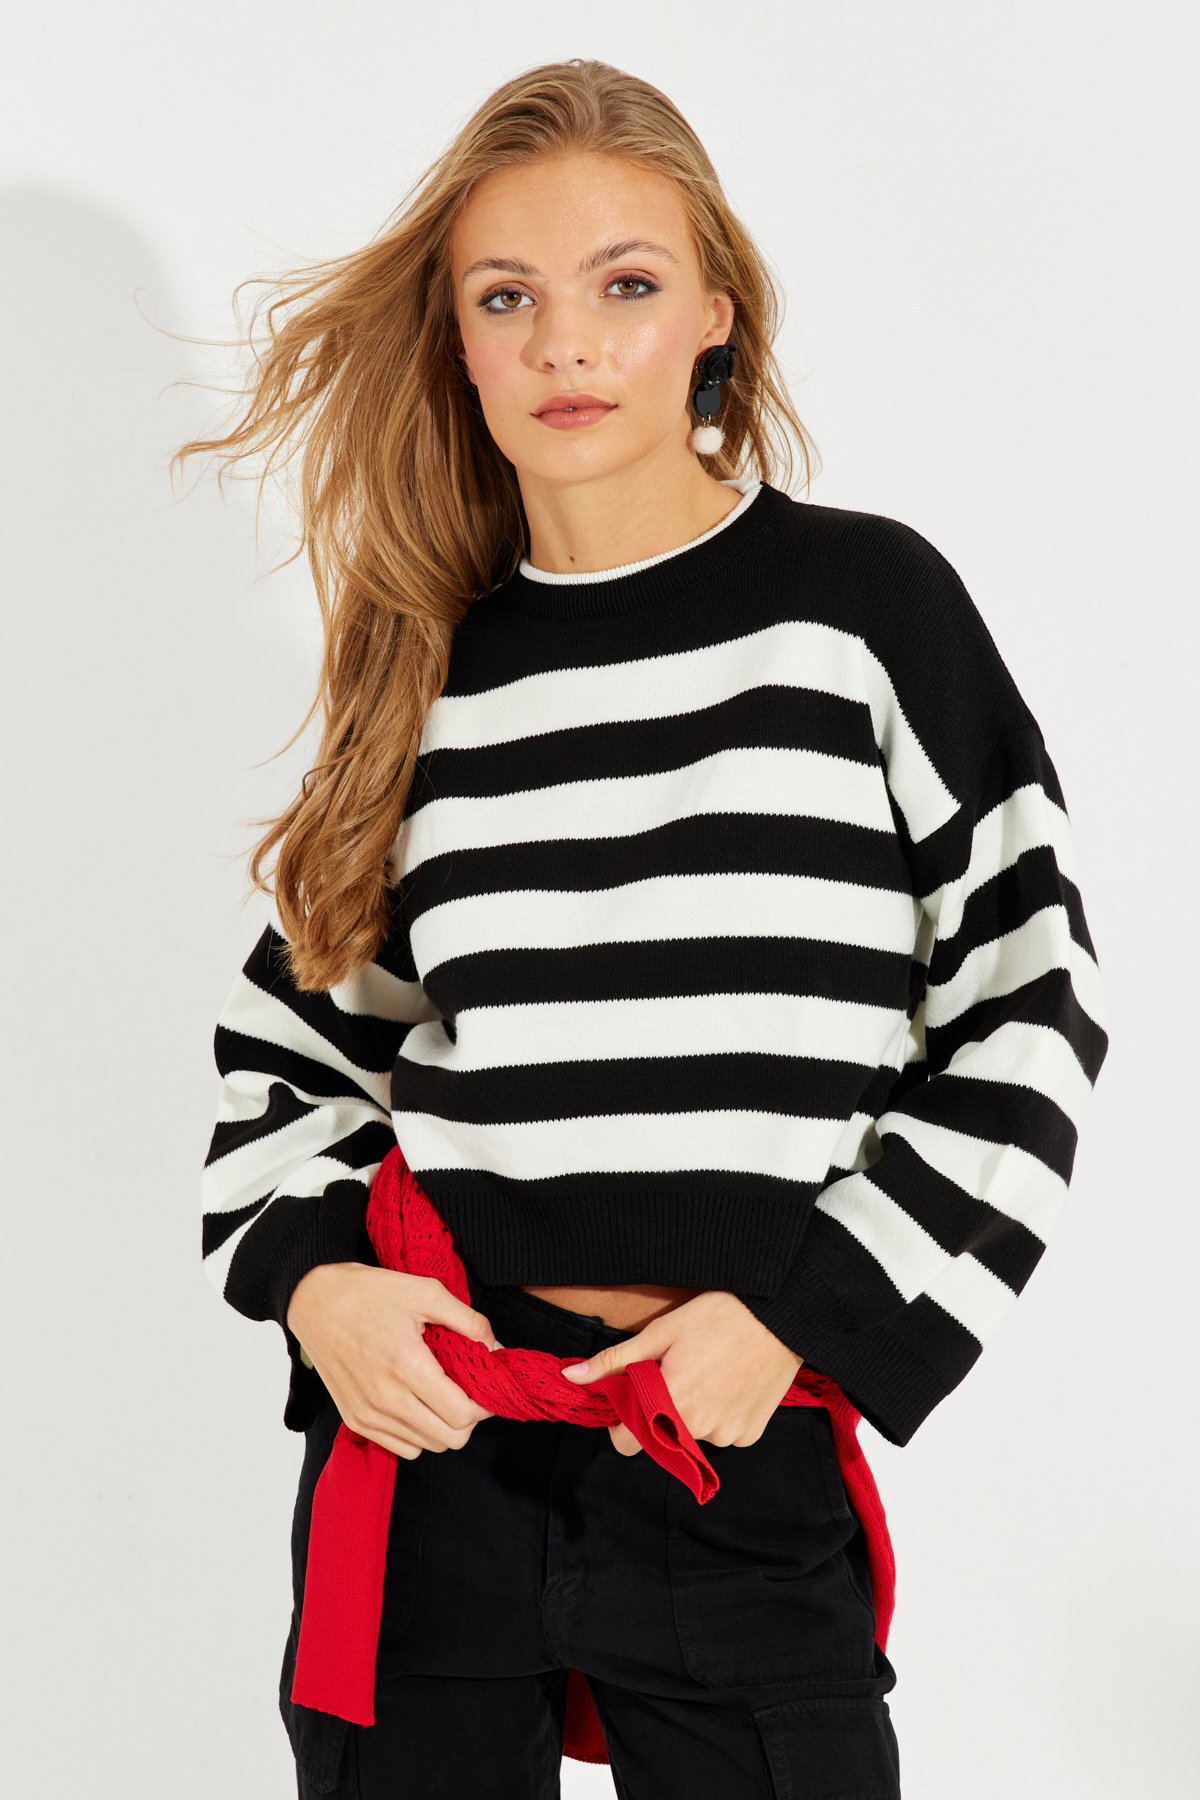 Cool & Sexy Women's Black and White Striped Sweater